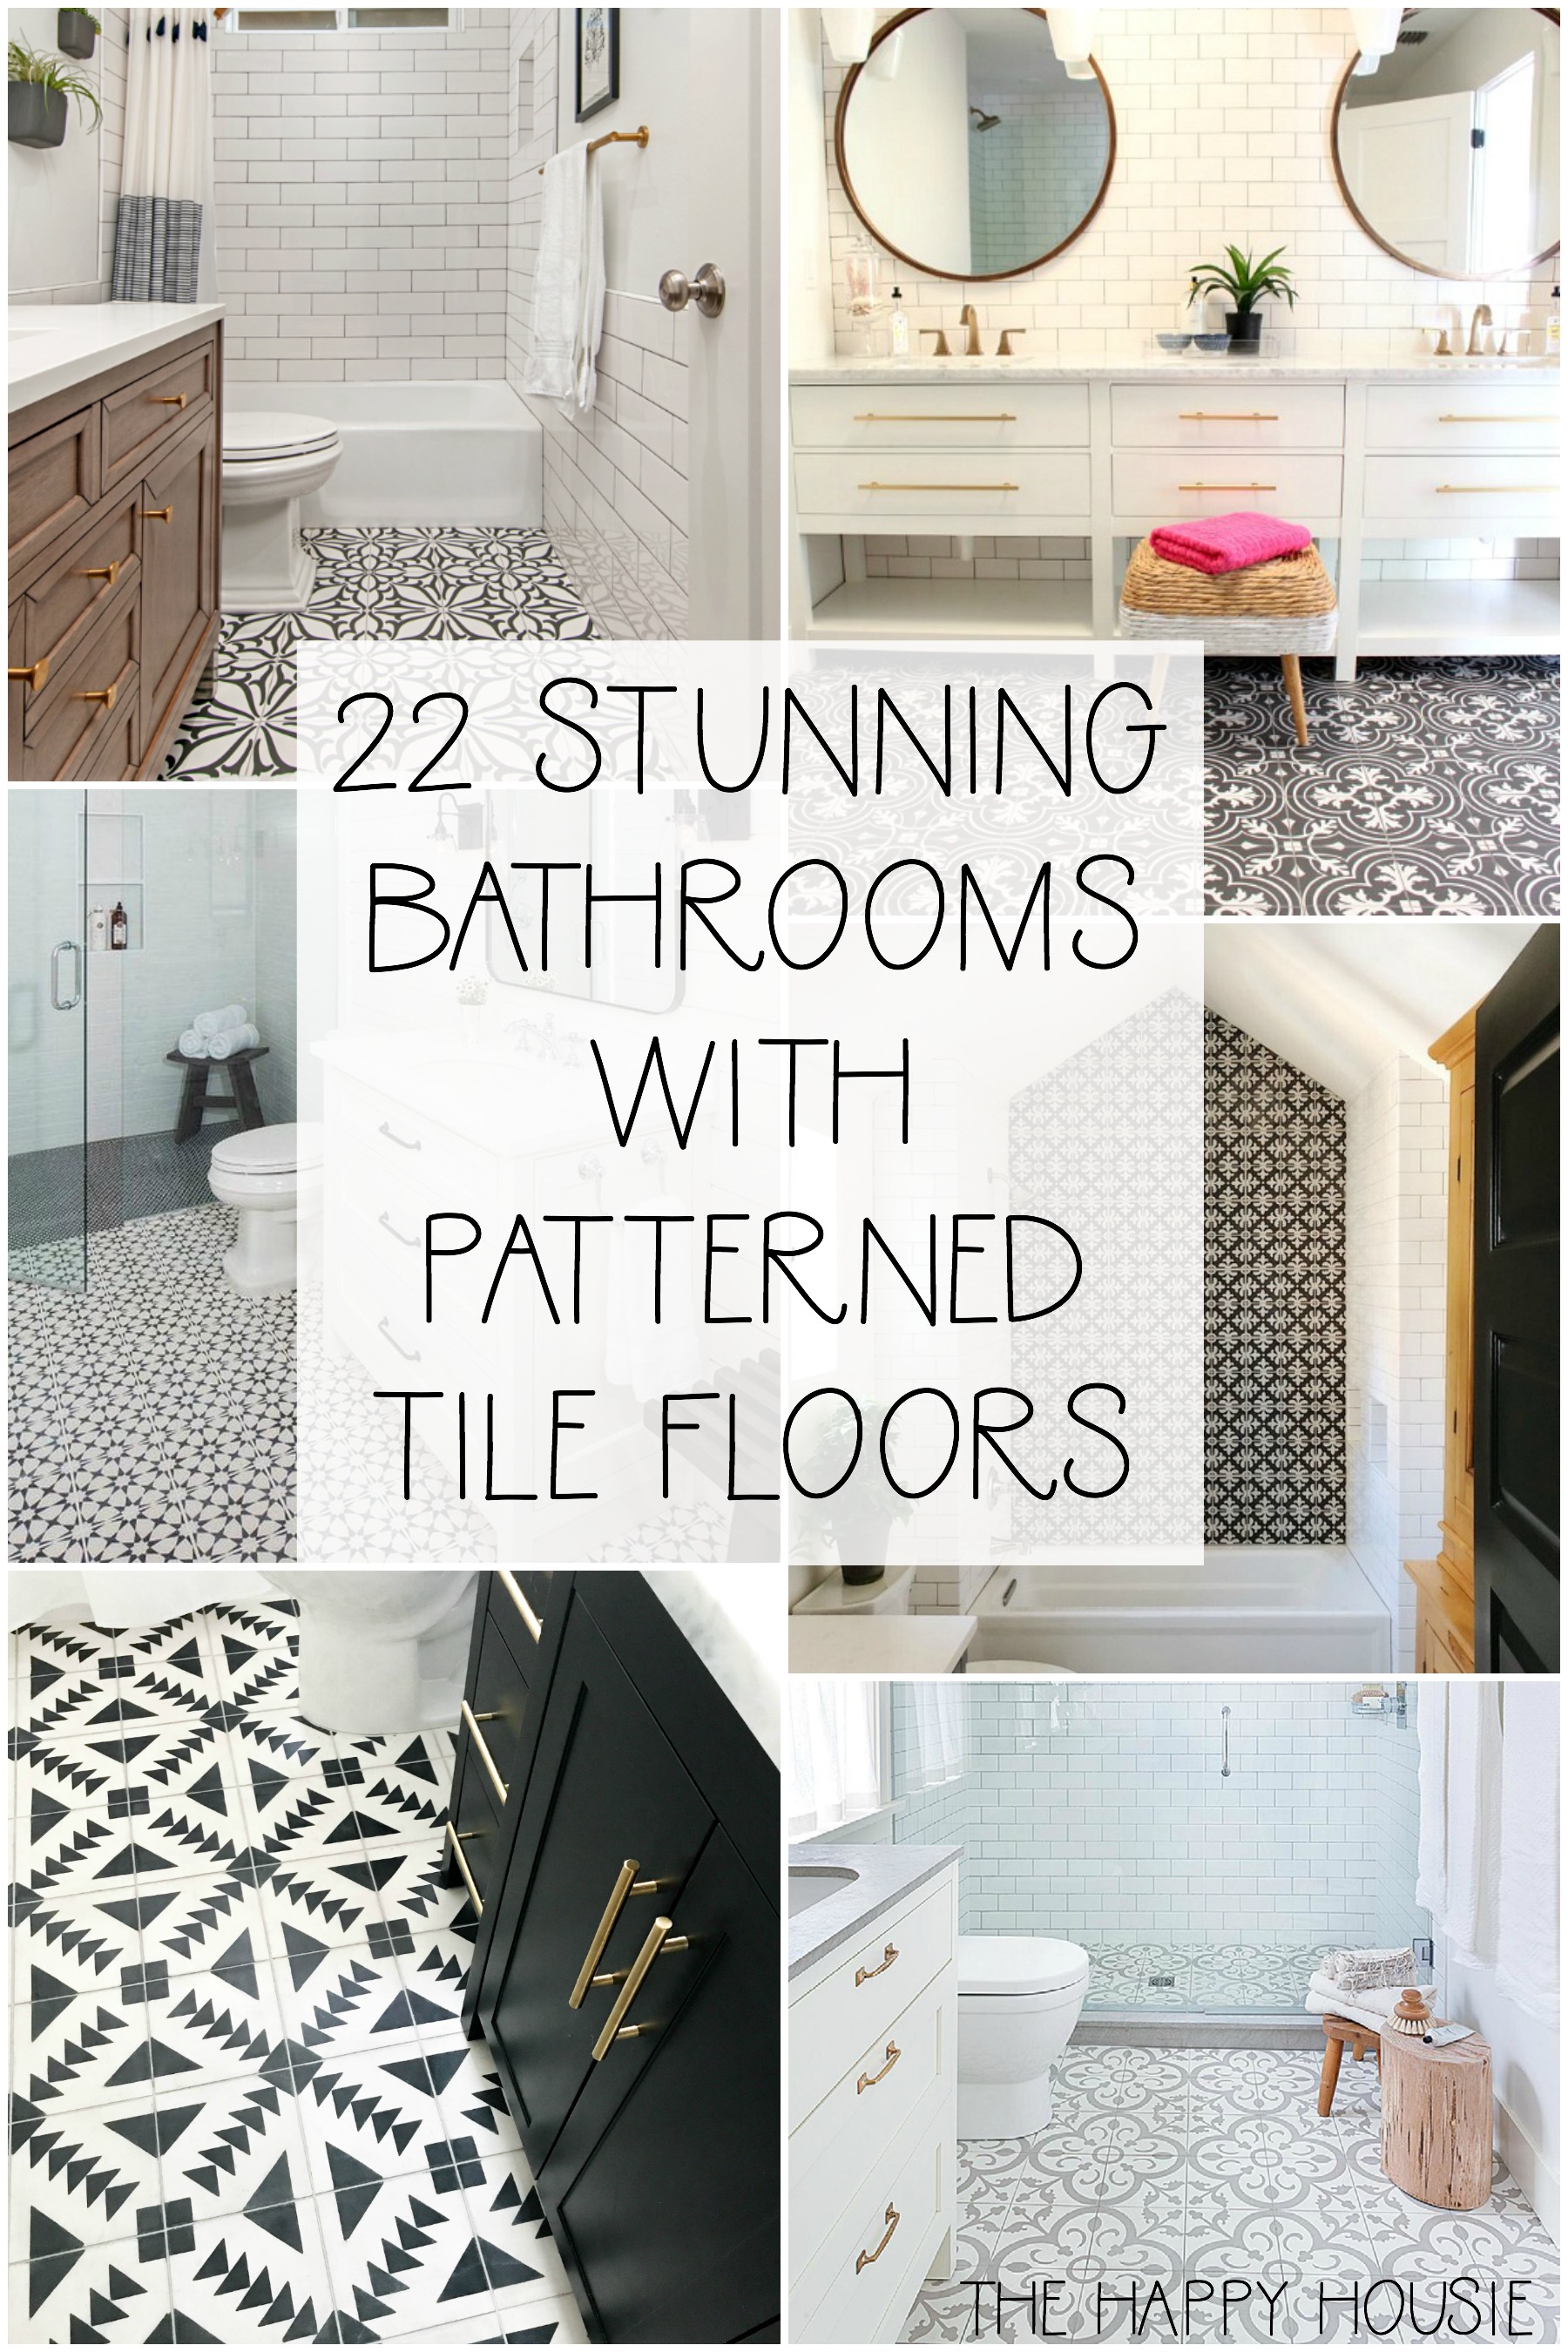 22 Stunning Bathroom With Patterned Tile Floors graphic.